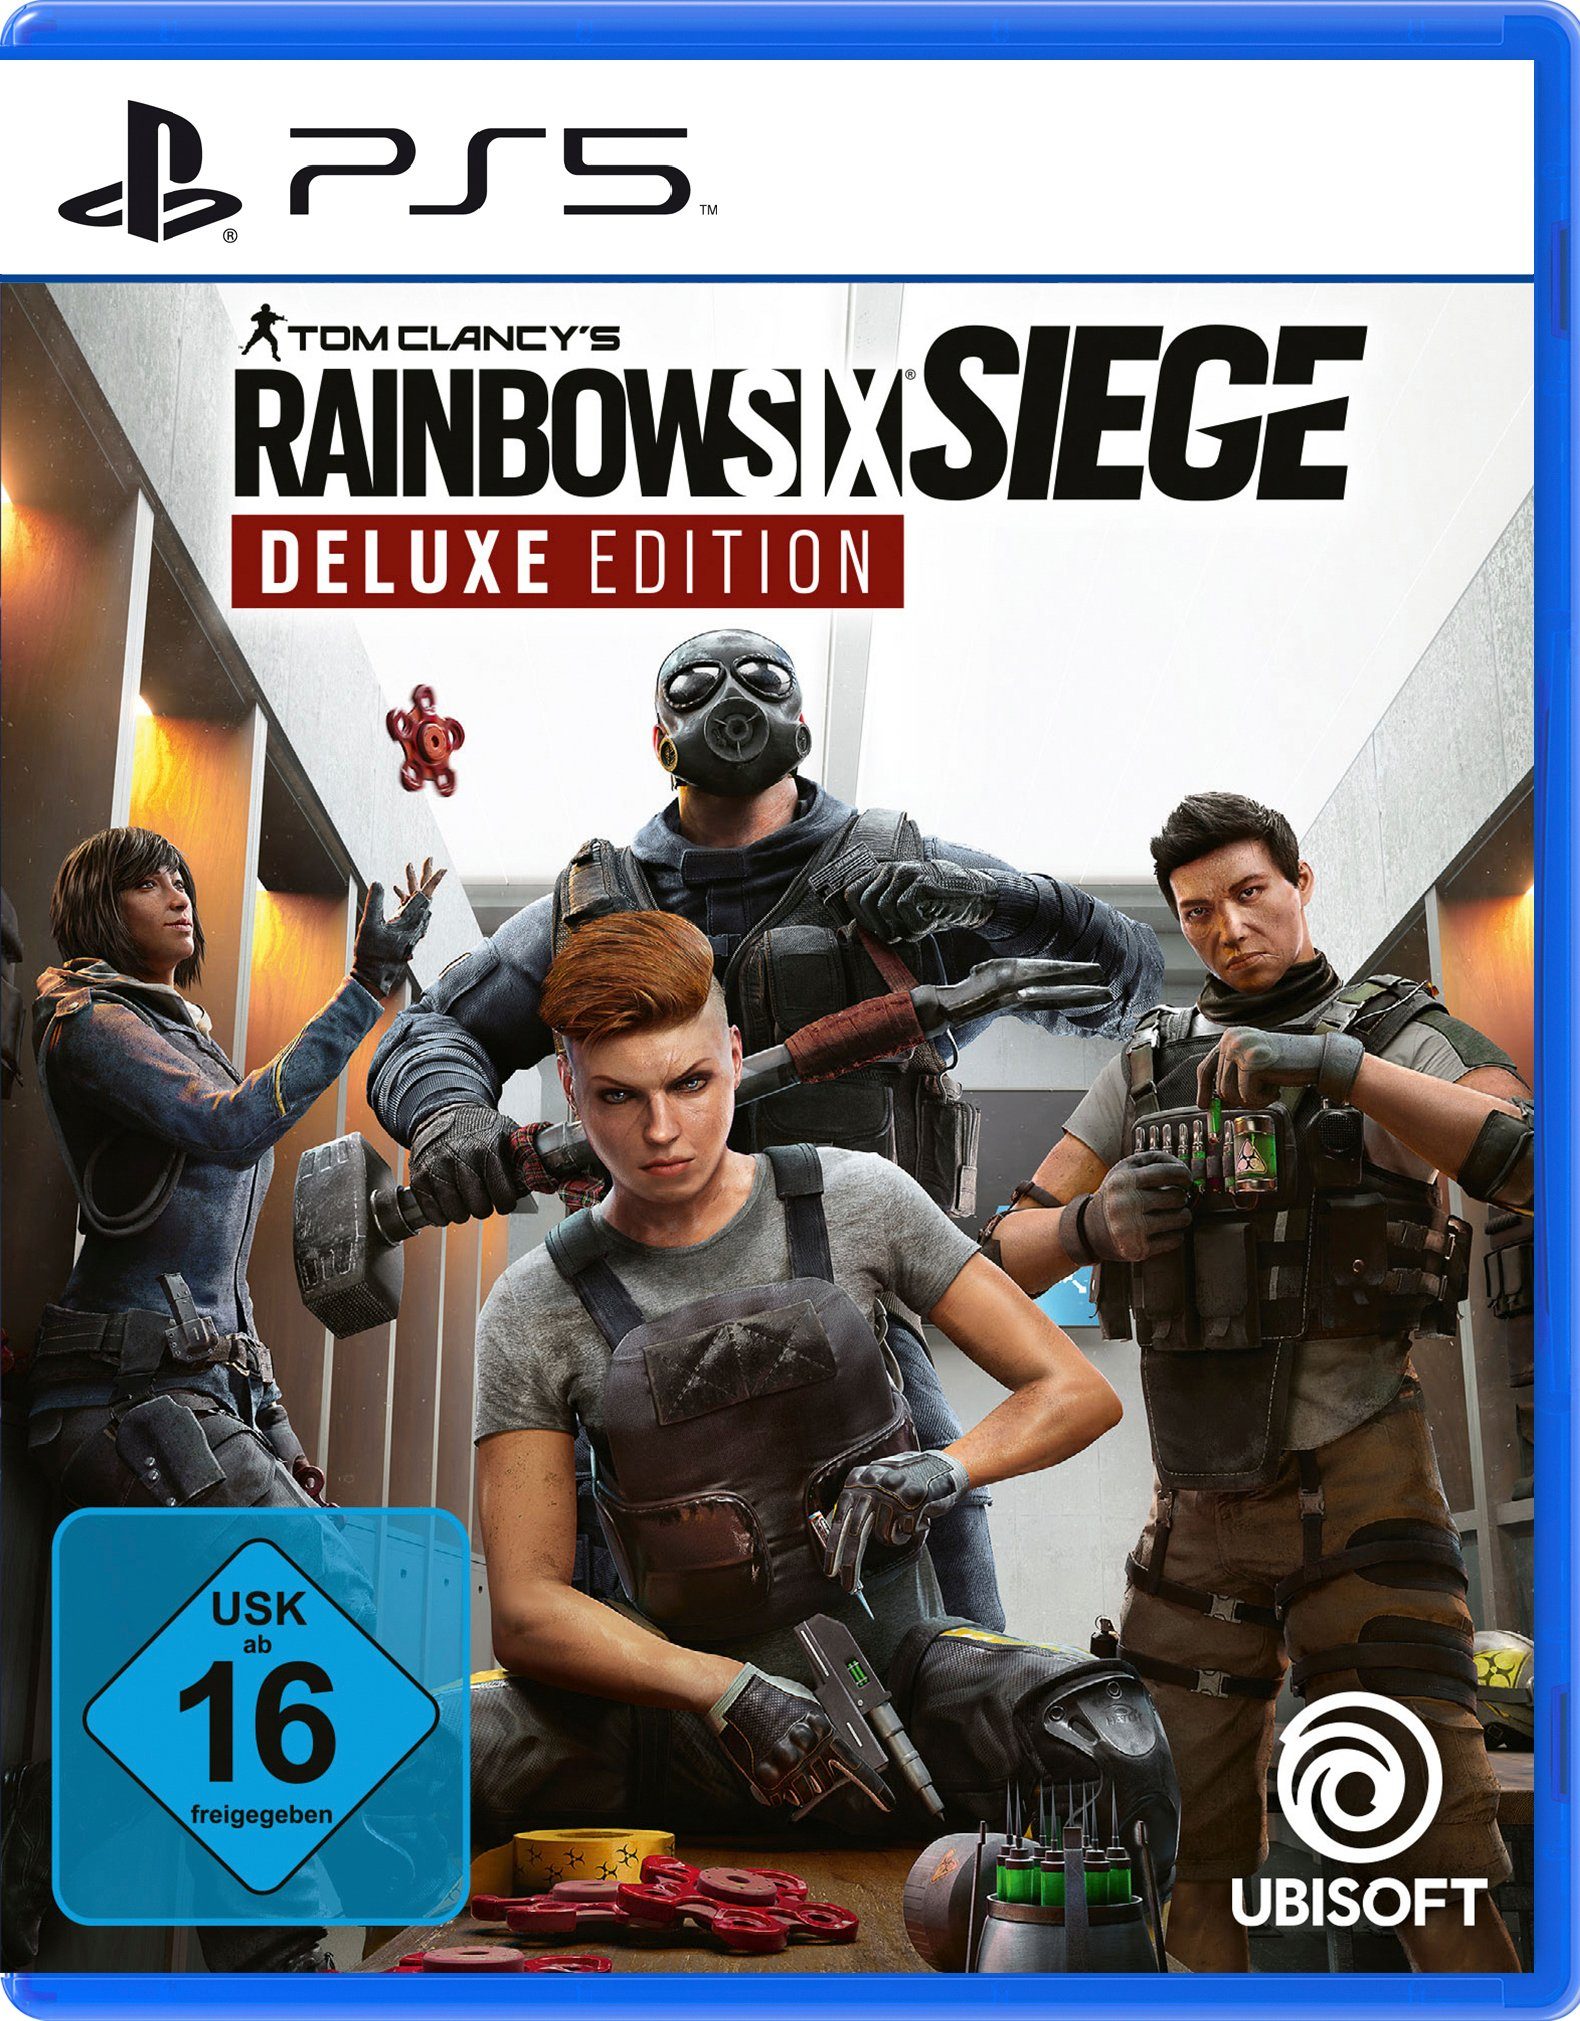 Rainbow Deluxe 5 Six Edition Clancy´s PlayStation UBISOFT Tom Siege